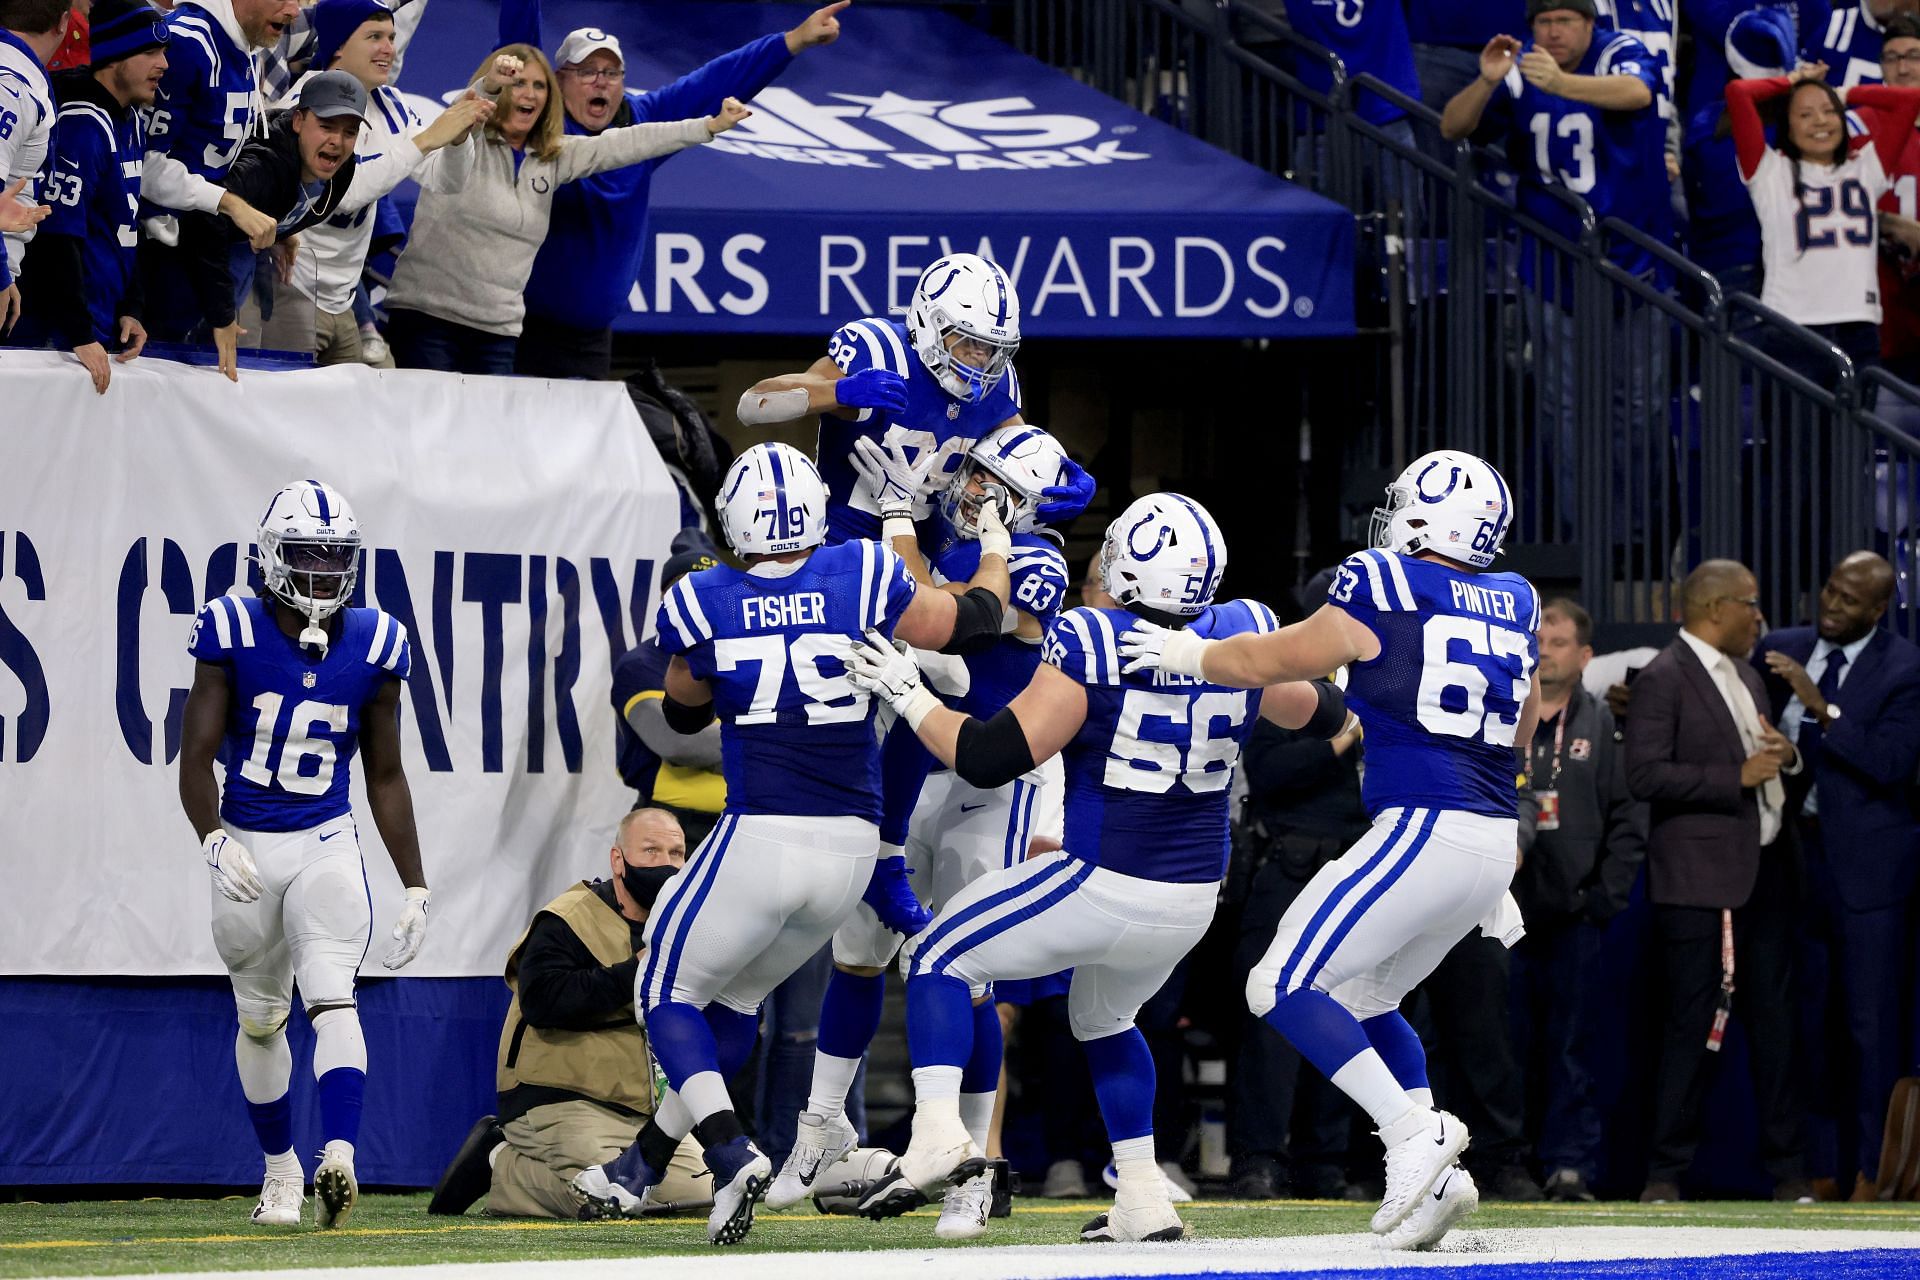 A win over the Patriots allowed the surging Colts to shoot up the AFC power rankings